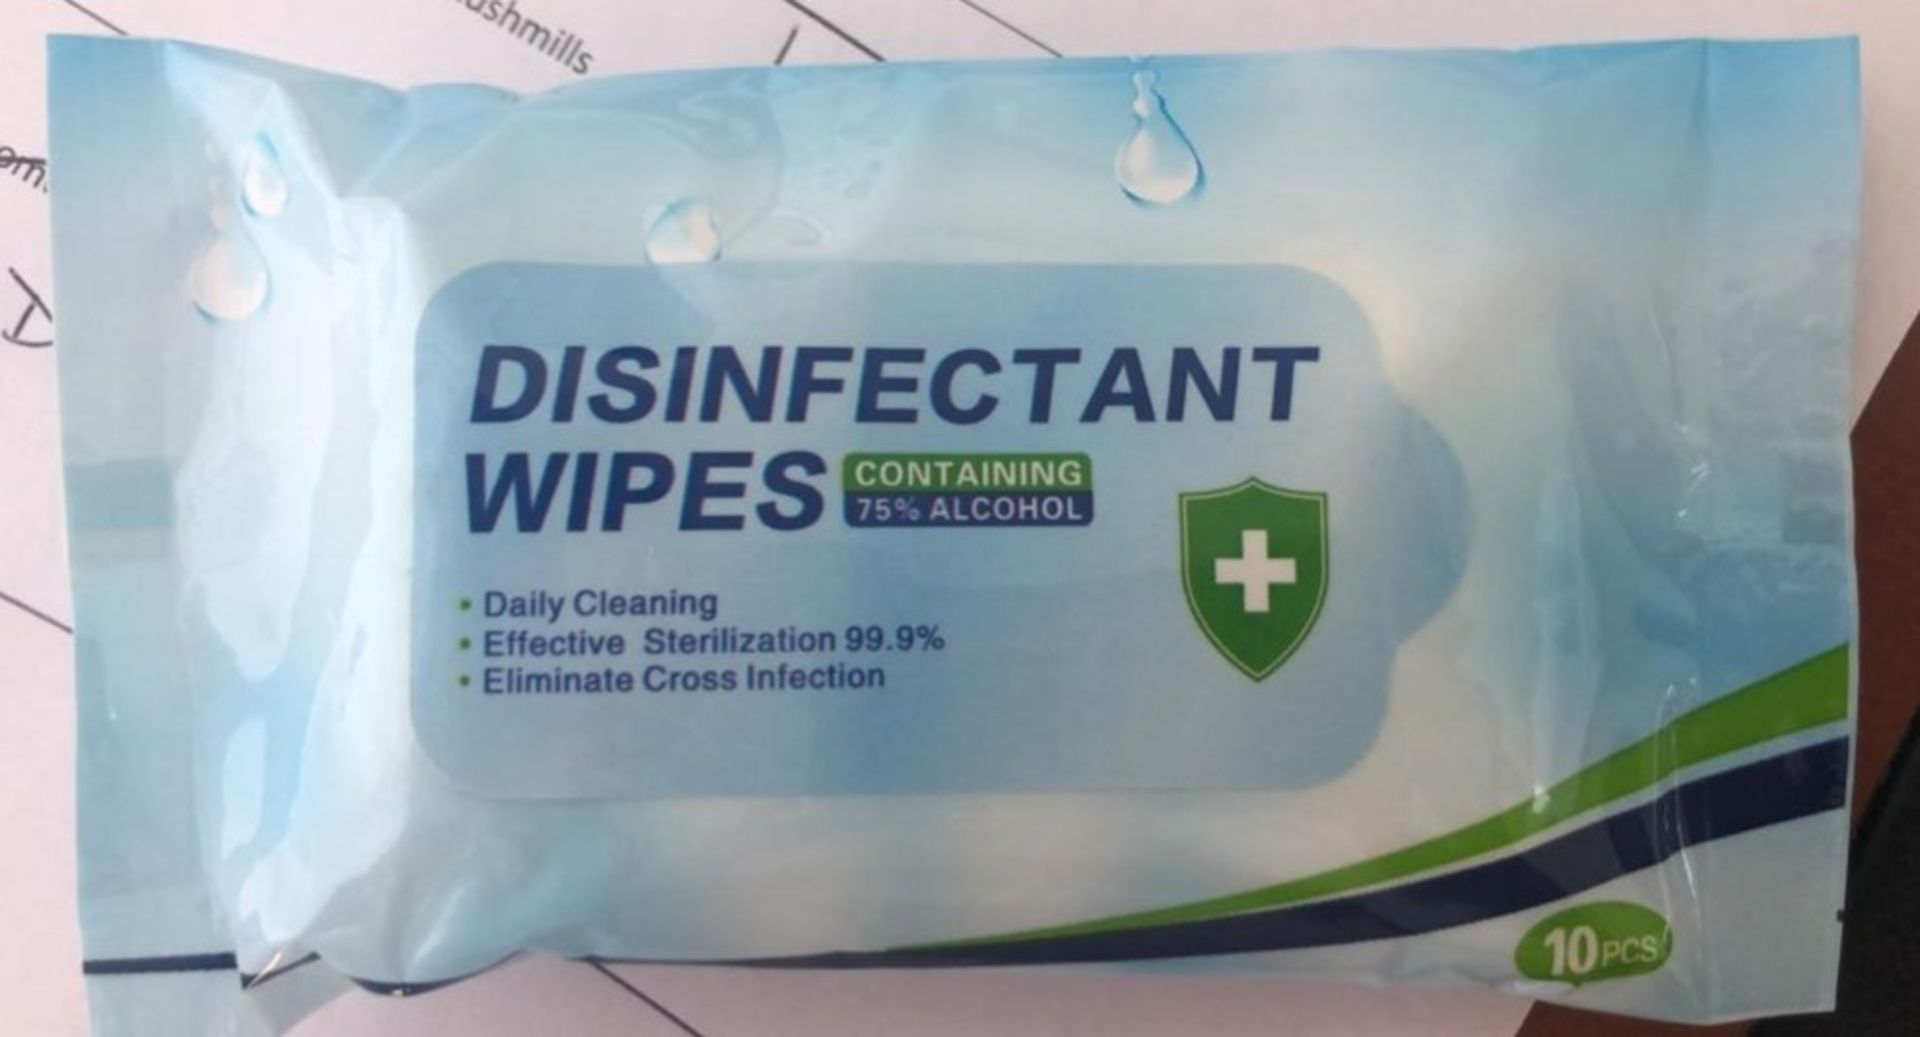 10,000 Antibacterial Disinfectant Wipes (75% Alcohol)